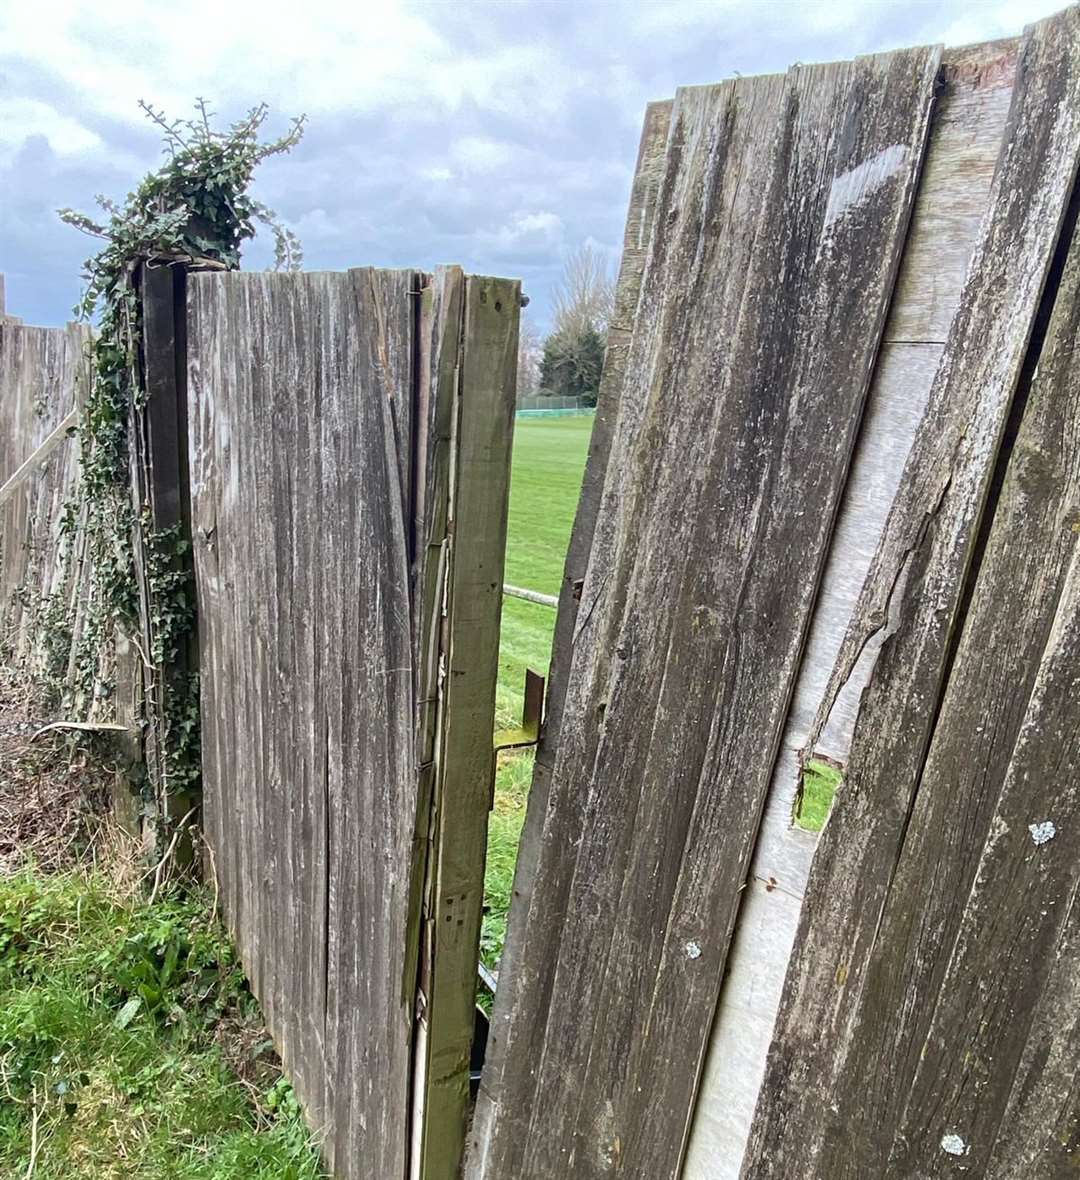 Fence posts were damaged by vandals to gain access to Crockenhill FC's home ground